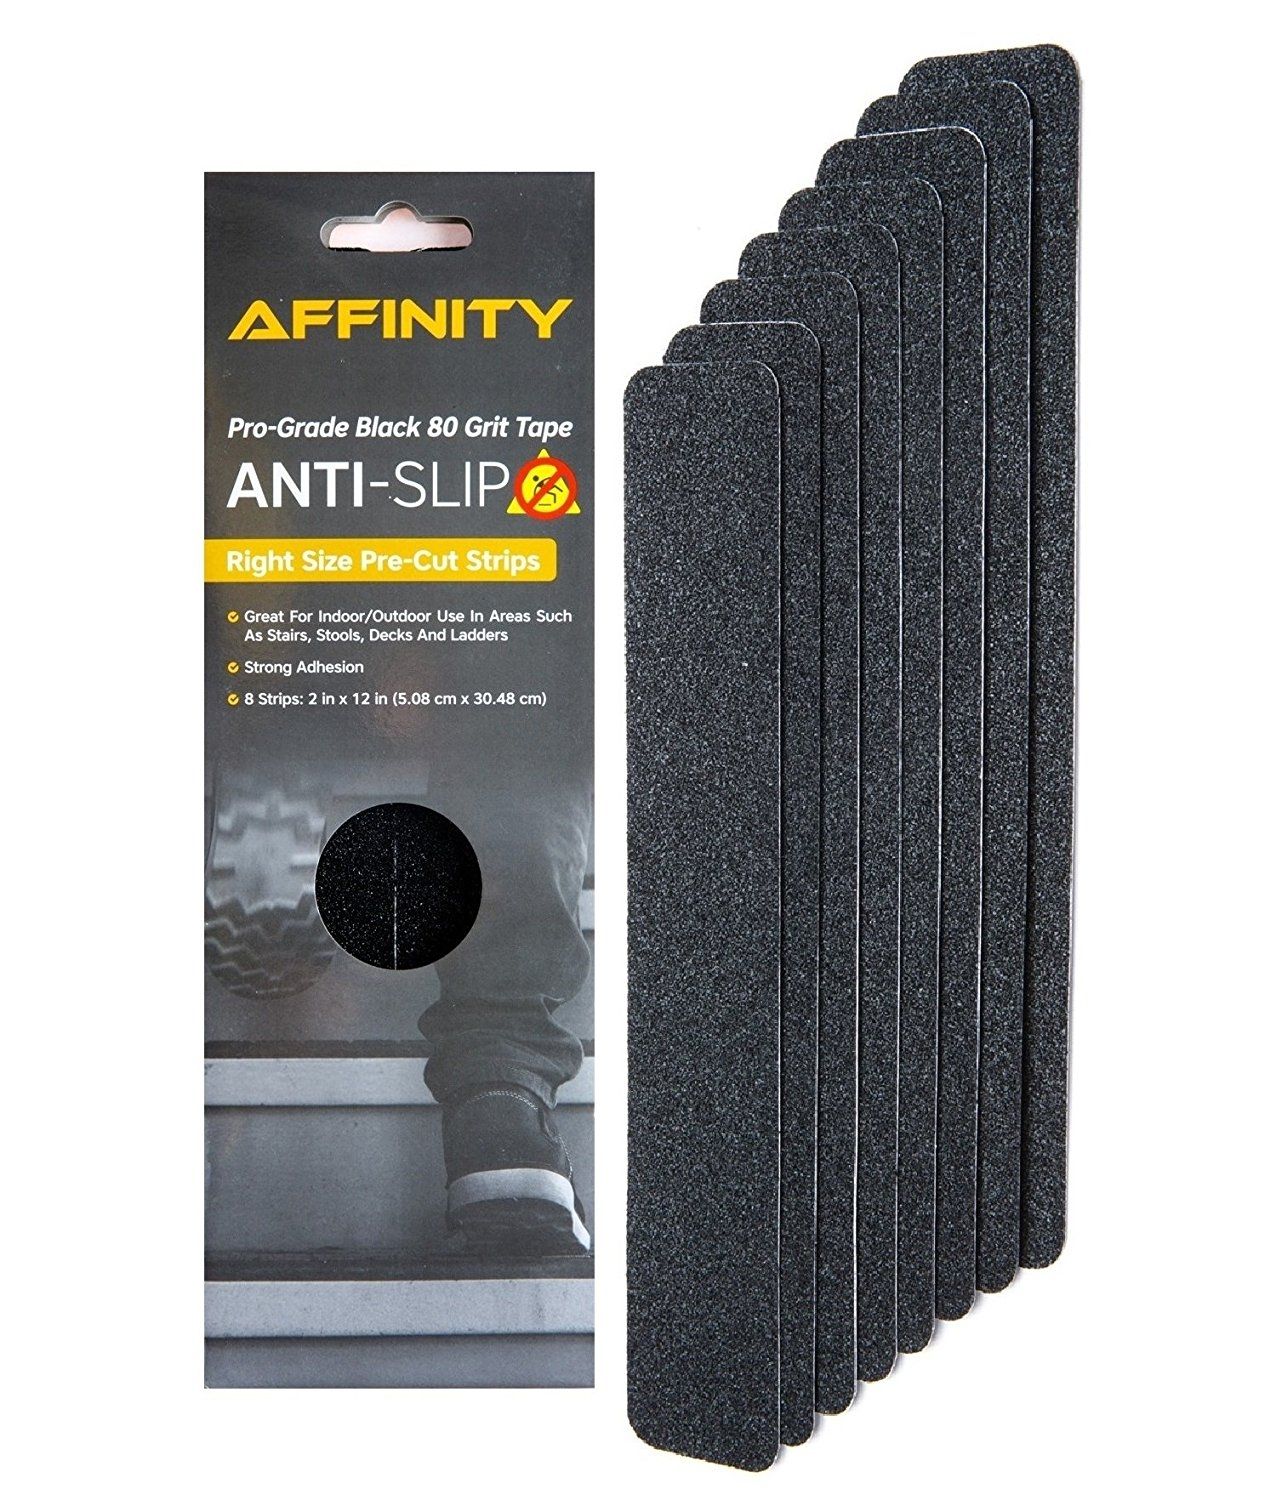 Anti Slip Tape Premium 8 Pre Cut Strips Black 80 Grit Slip In Traction Pads For Stairs (View 15 of 15)